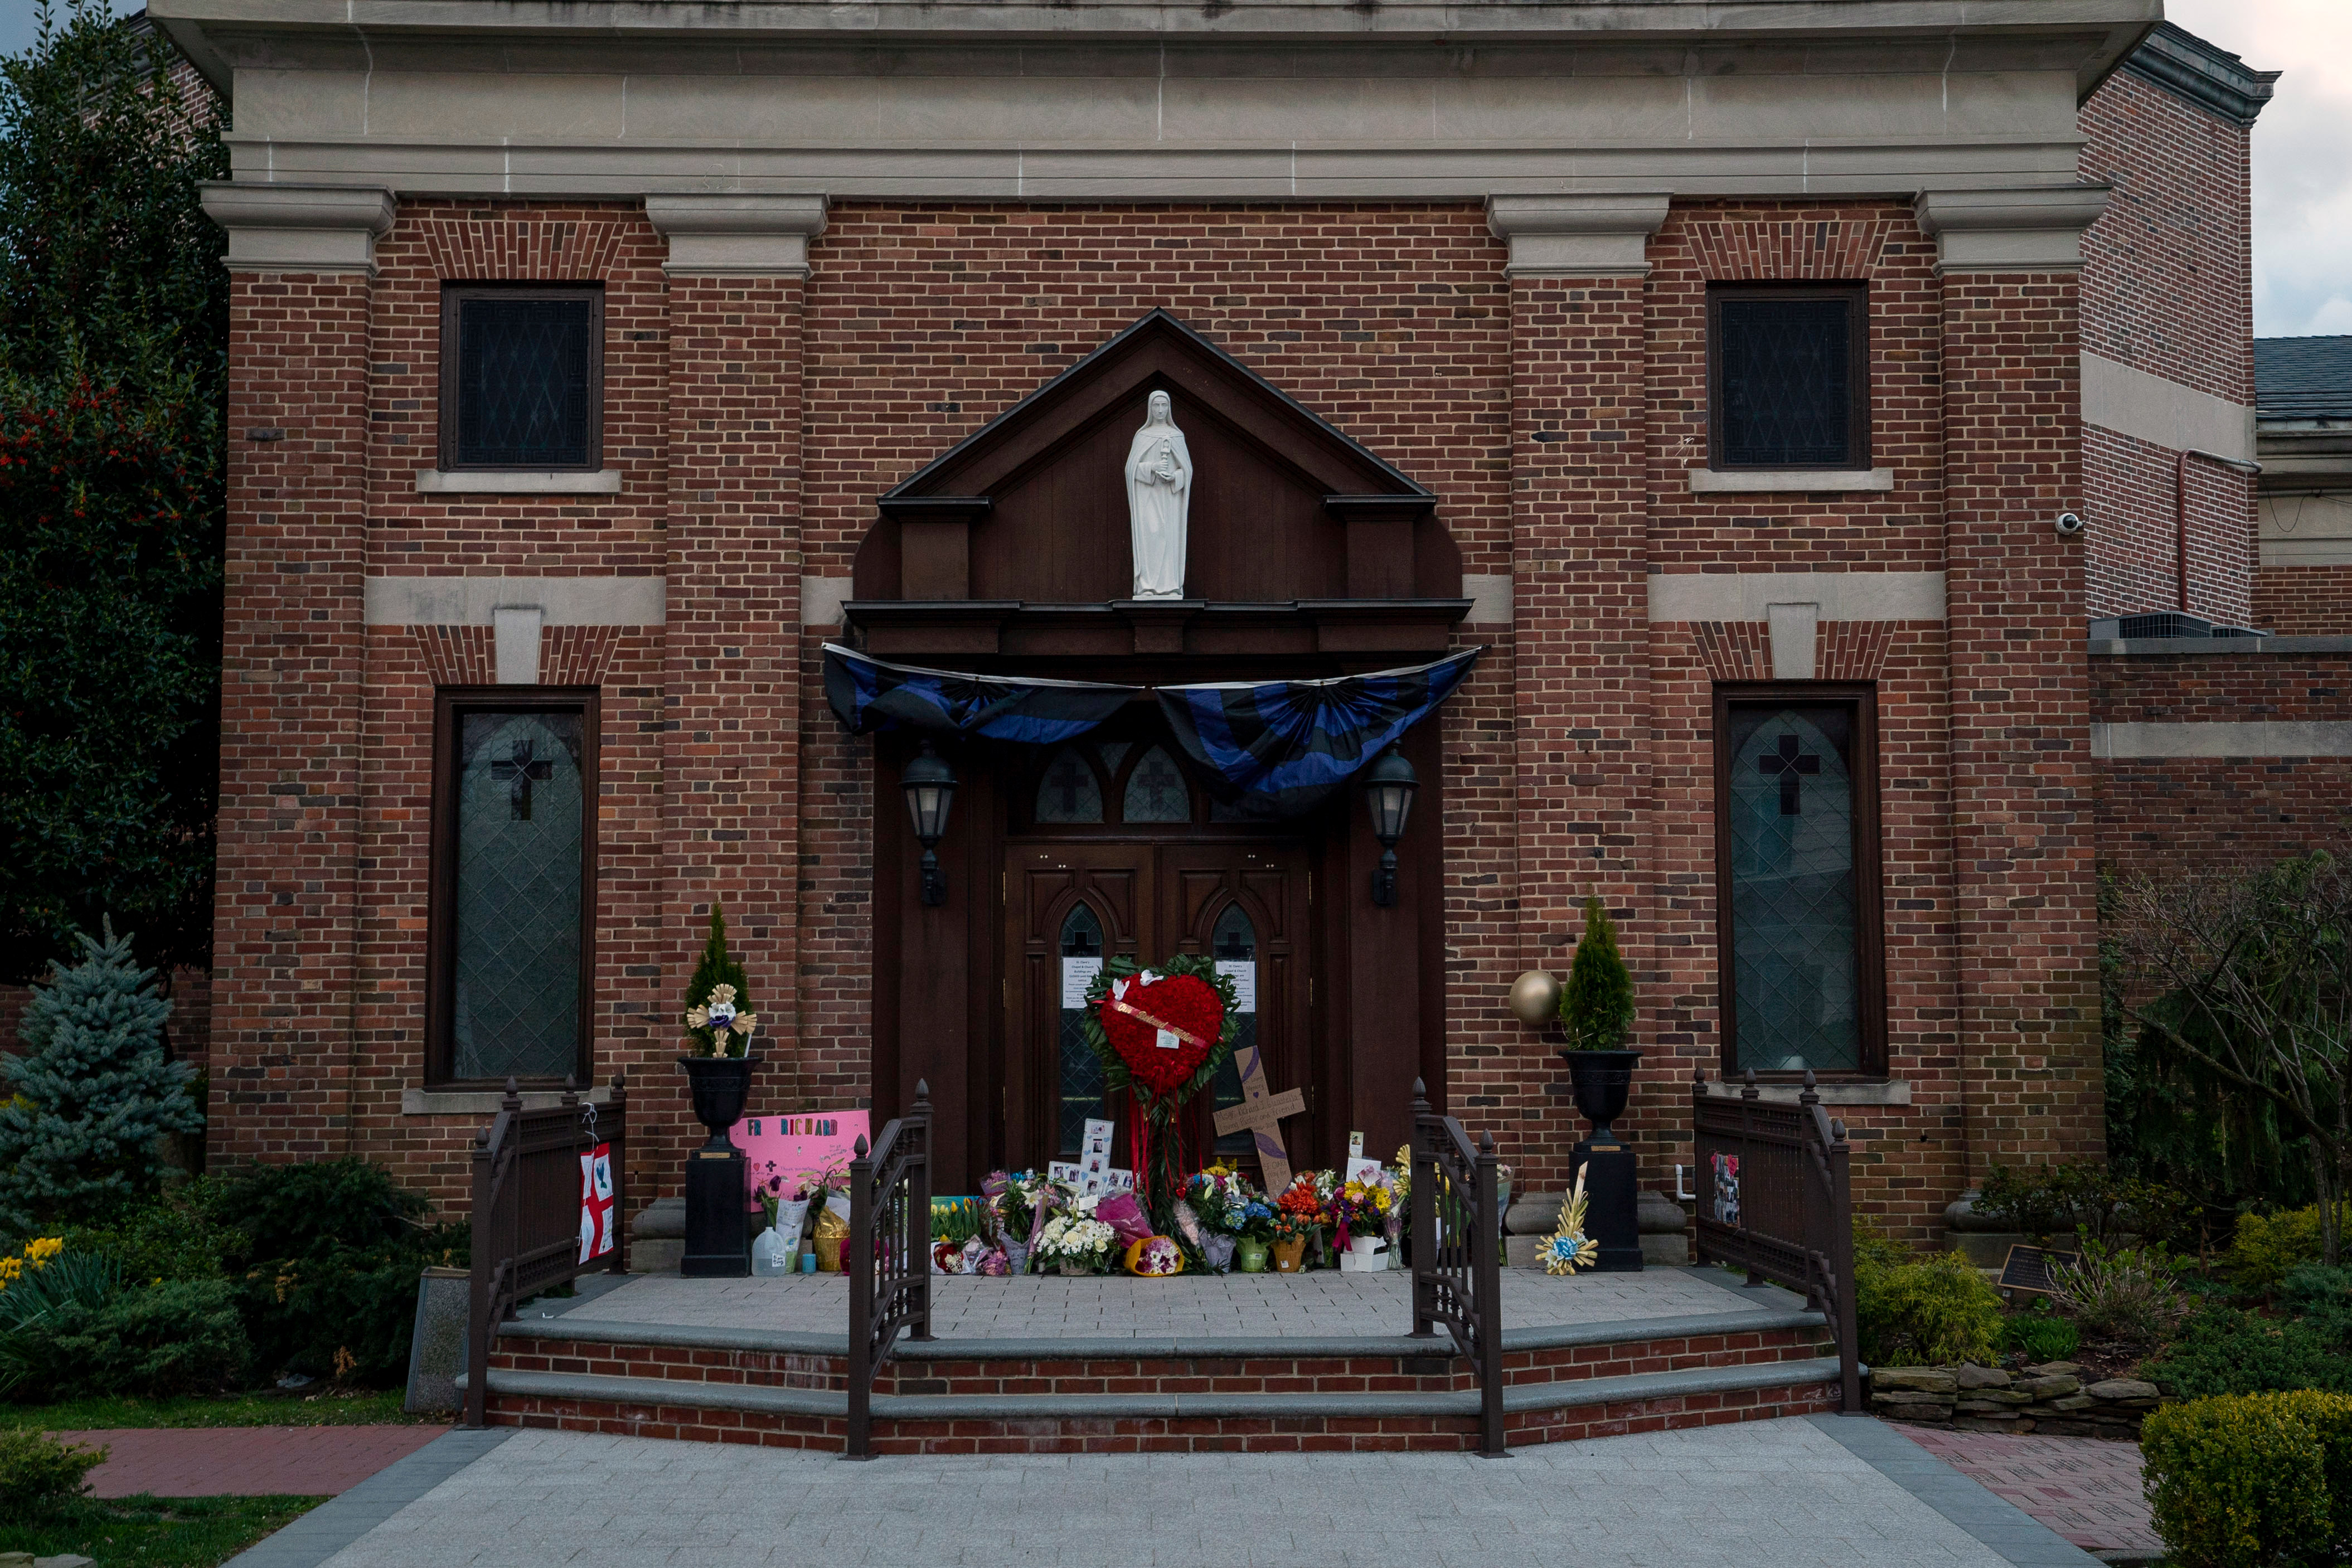 A memorial for Monsignor Richard Guastella, who died from Covid-19 on Thursday,  outside the doors of St. Clare Catholic Church in Staten Island, N.Y., on April 10, 2020. (Paul Moakley for TIME)